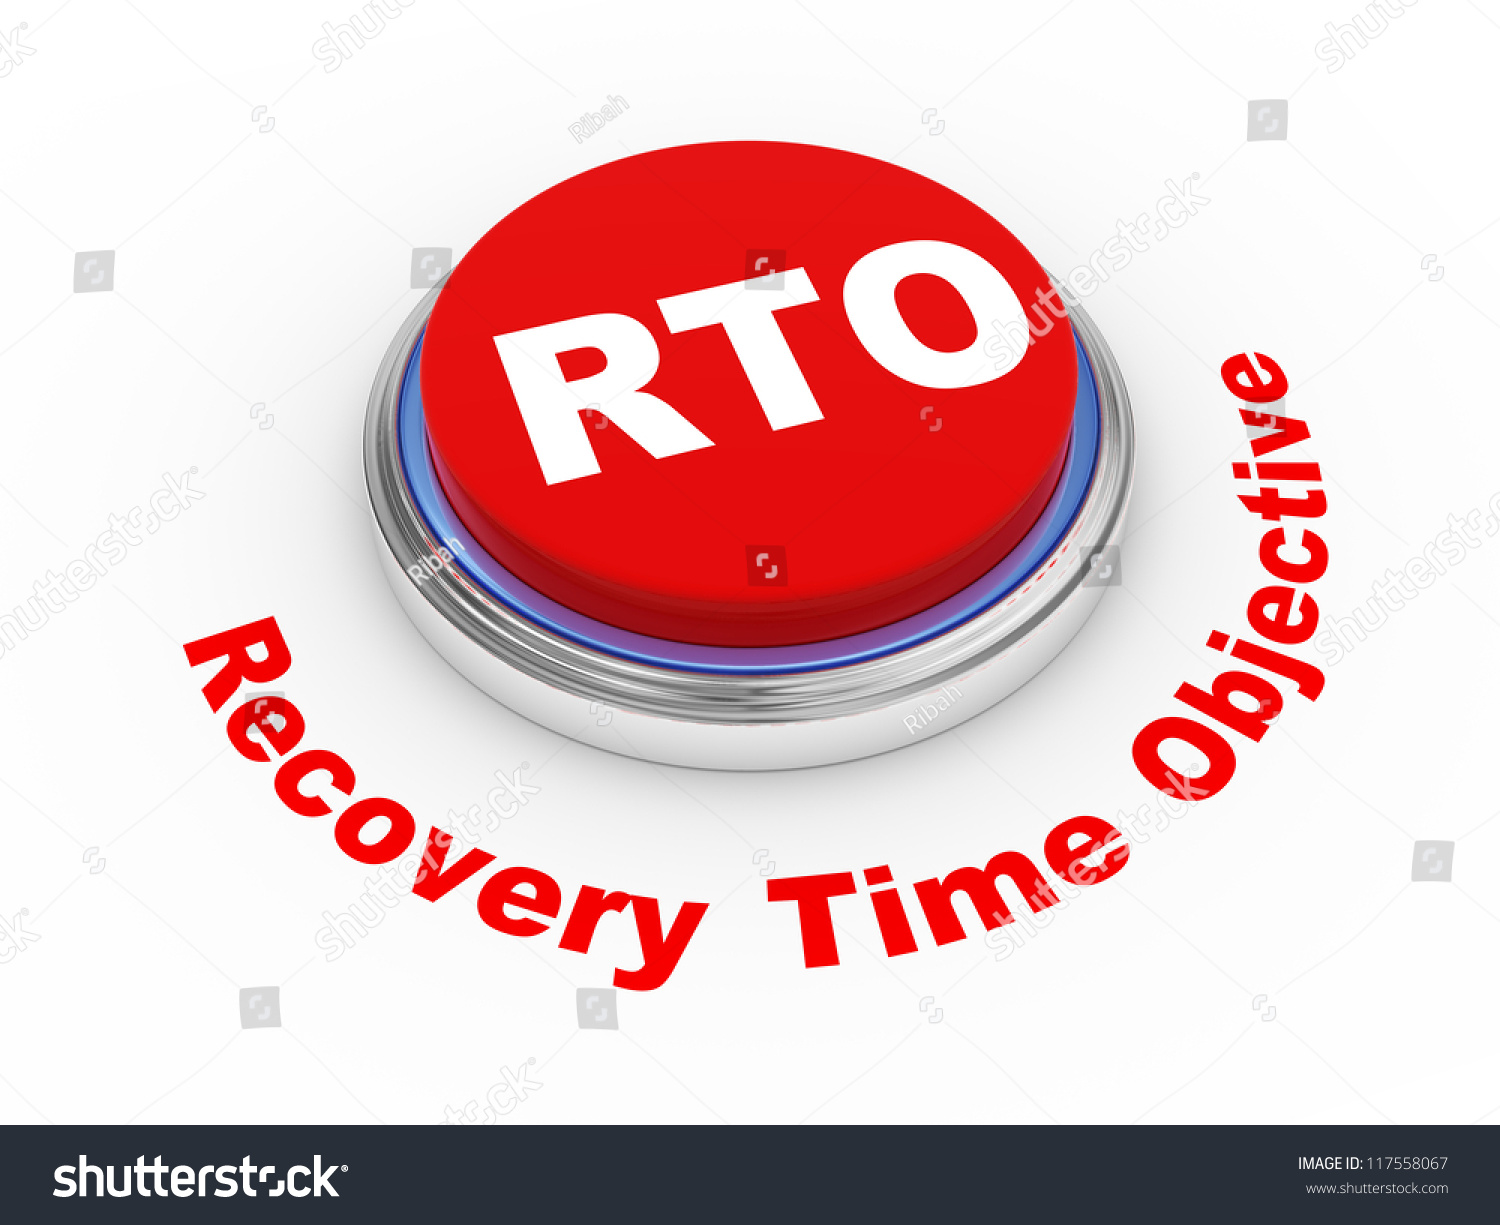 3d Illustration Rto Recovery Time Objective Stock ...